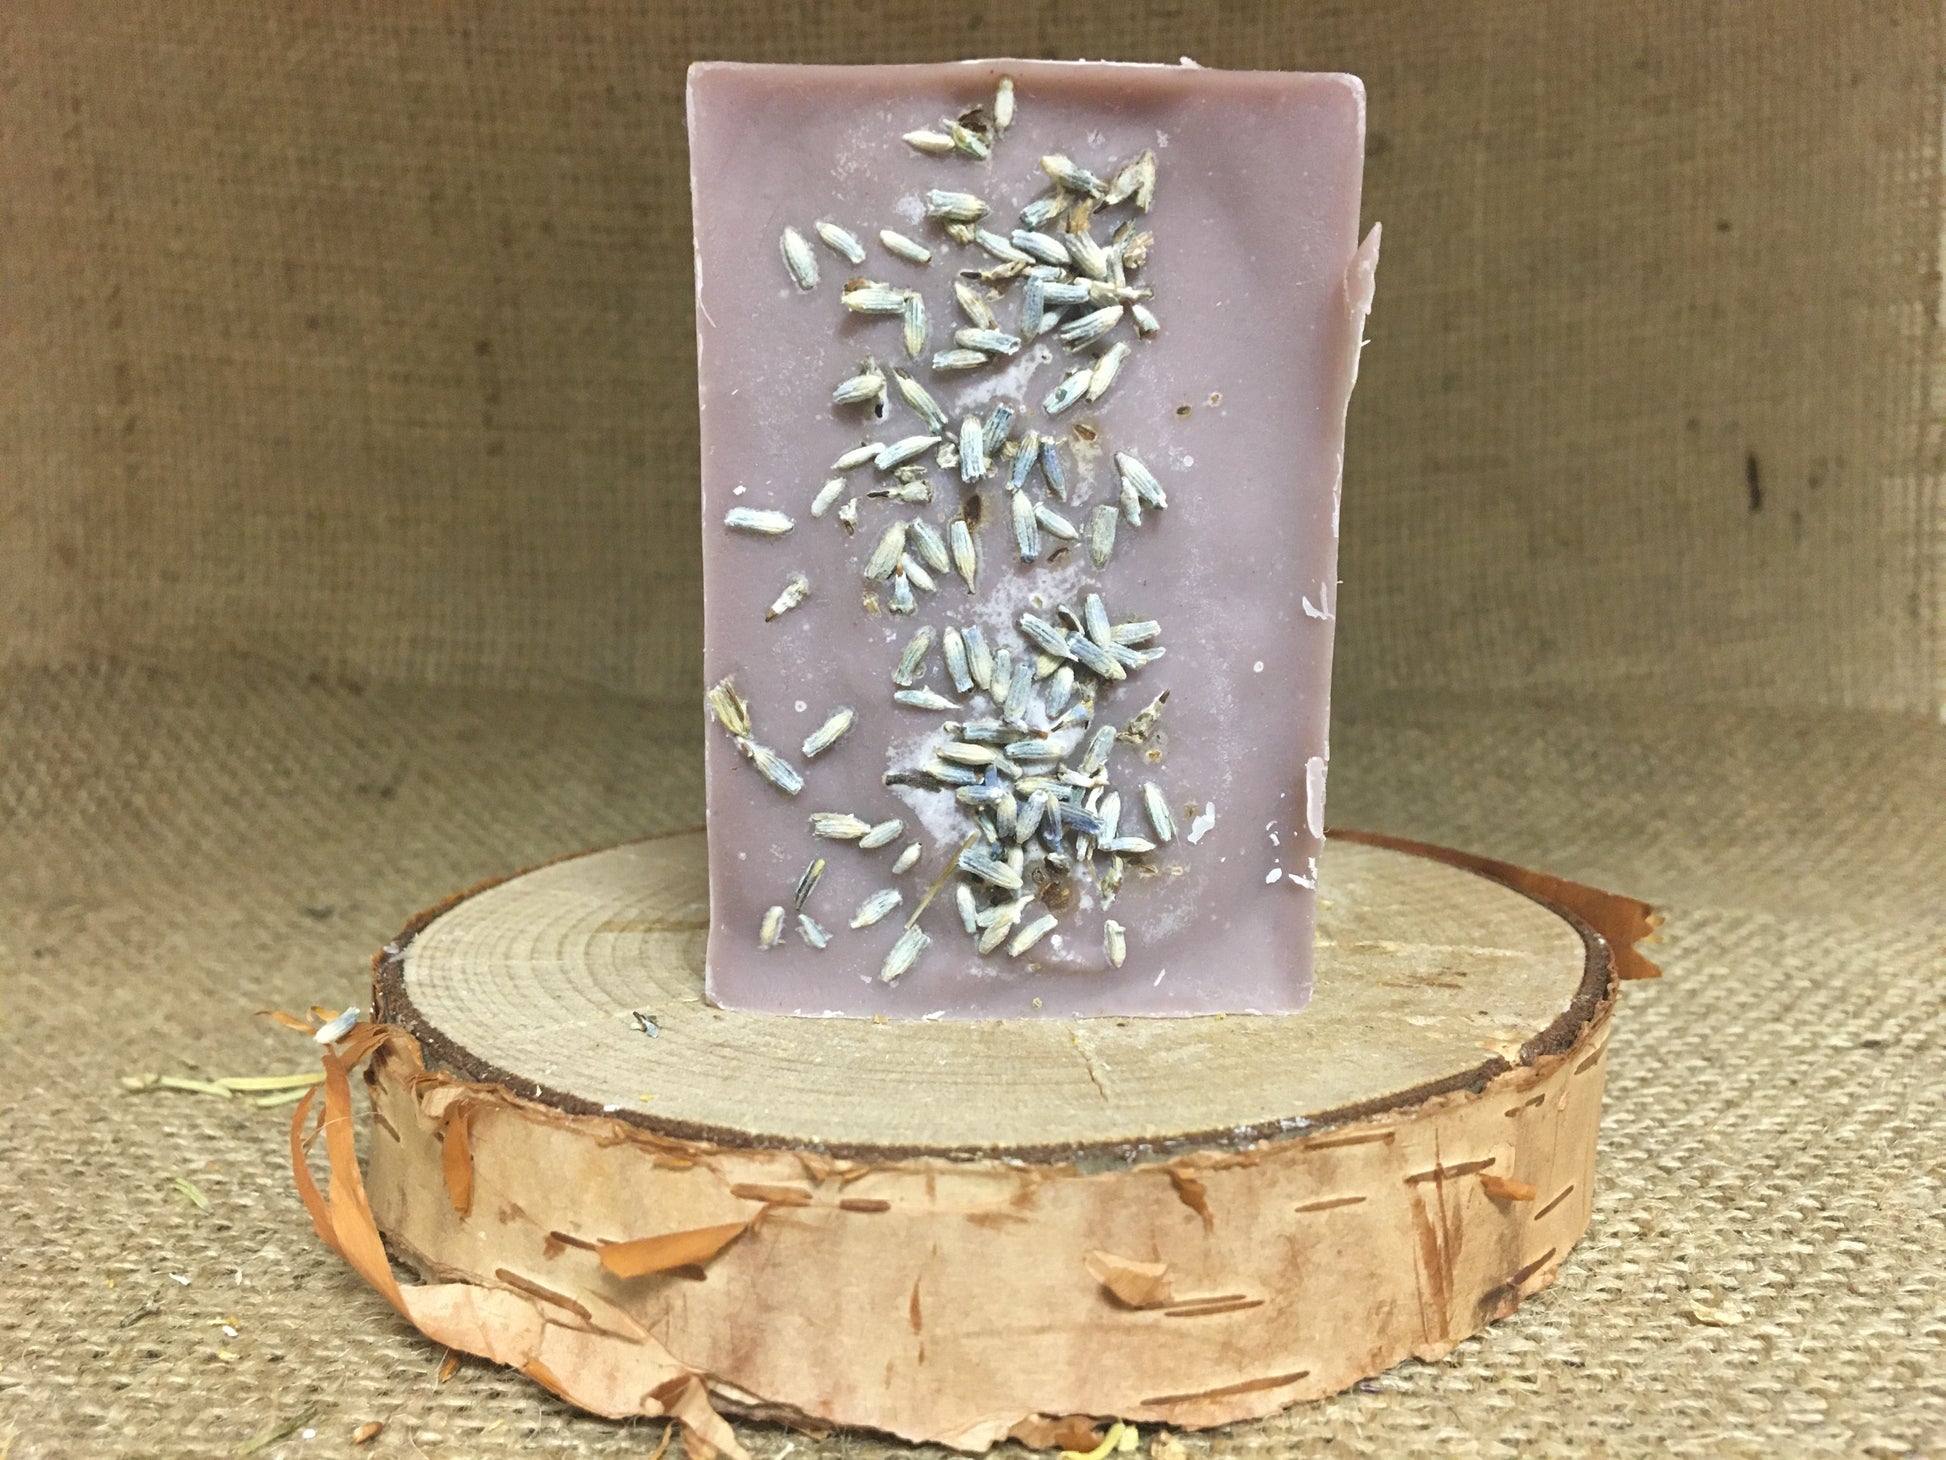 Lavender and Honey Soap with lavender buds